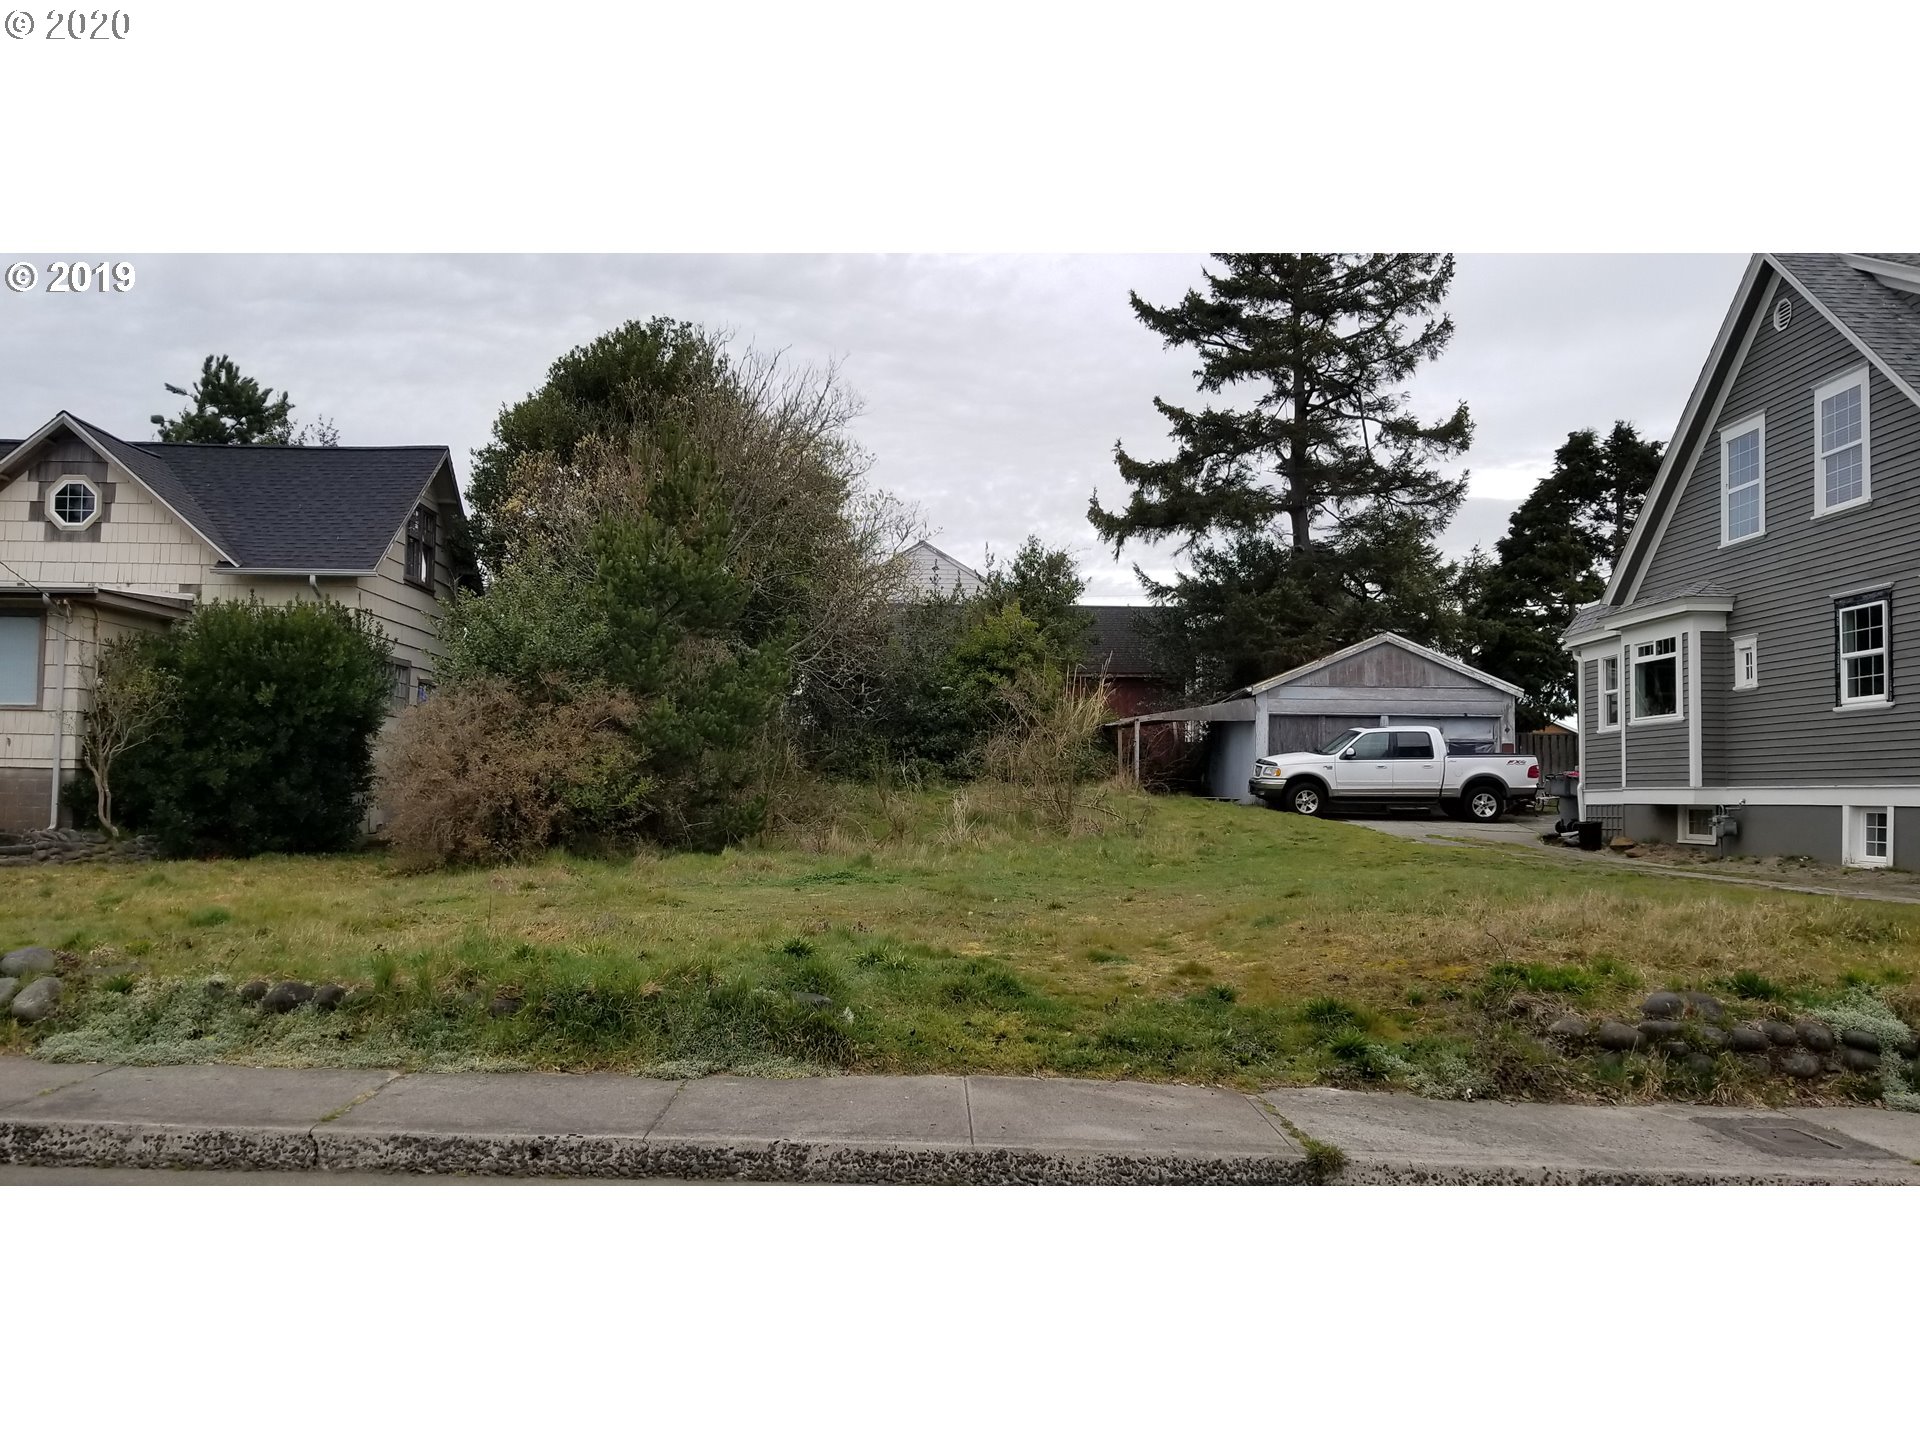 420 2nd AVE (1 of 2)